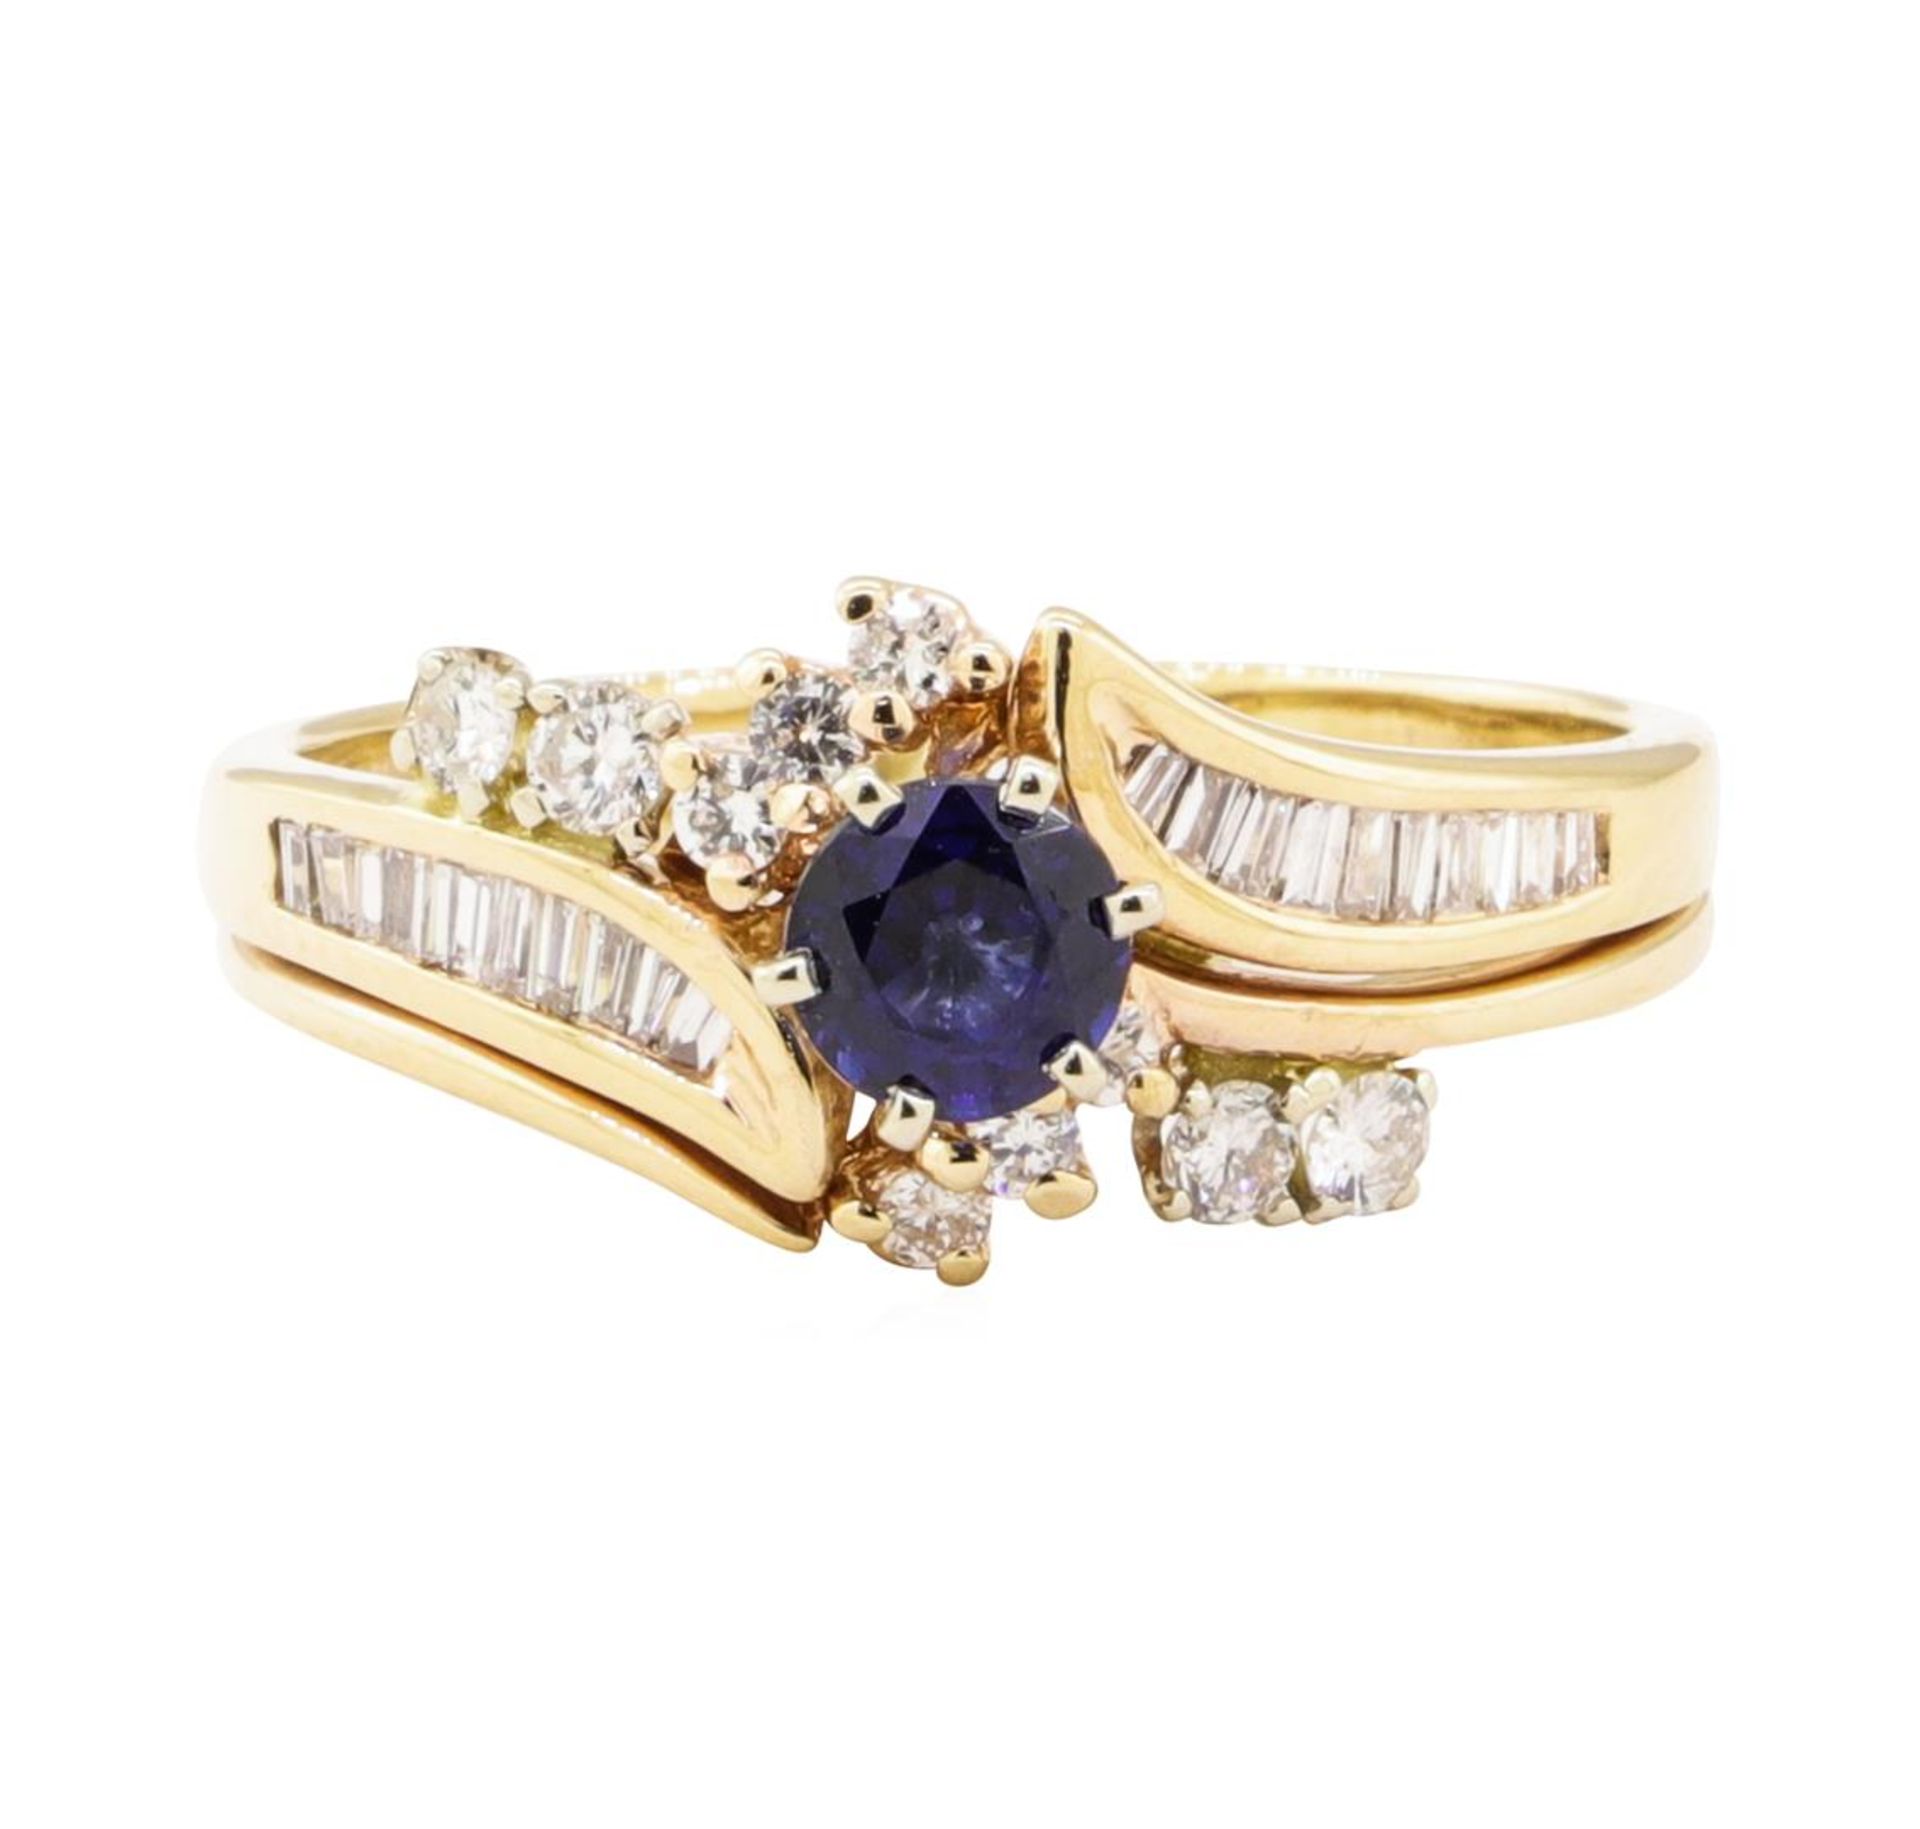 1.10 ctw Blue Sapphire and Diamond Ring - 14KT Yellow Gold - Image 2 of 4